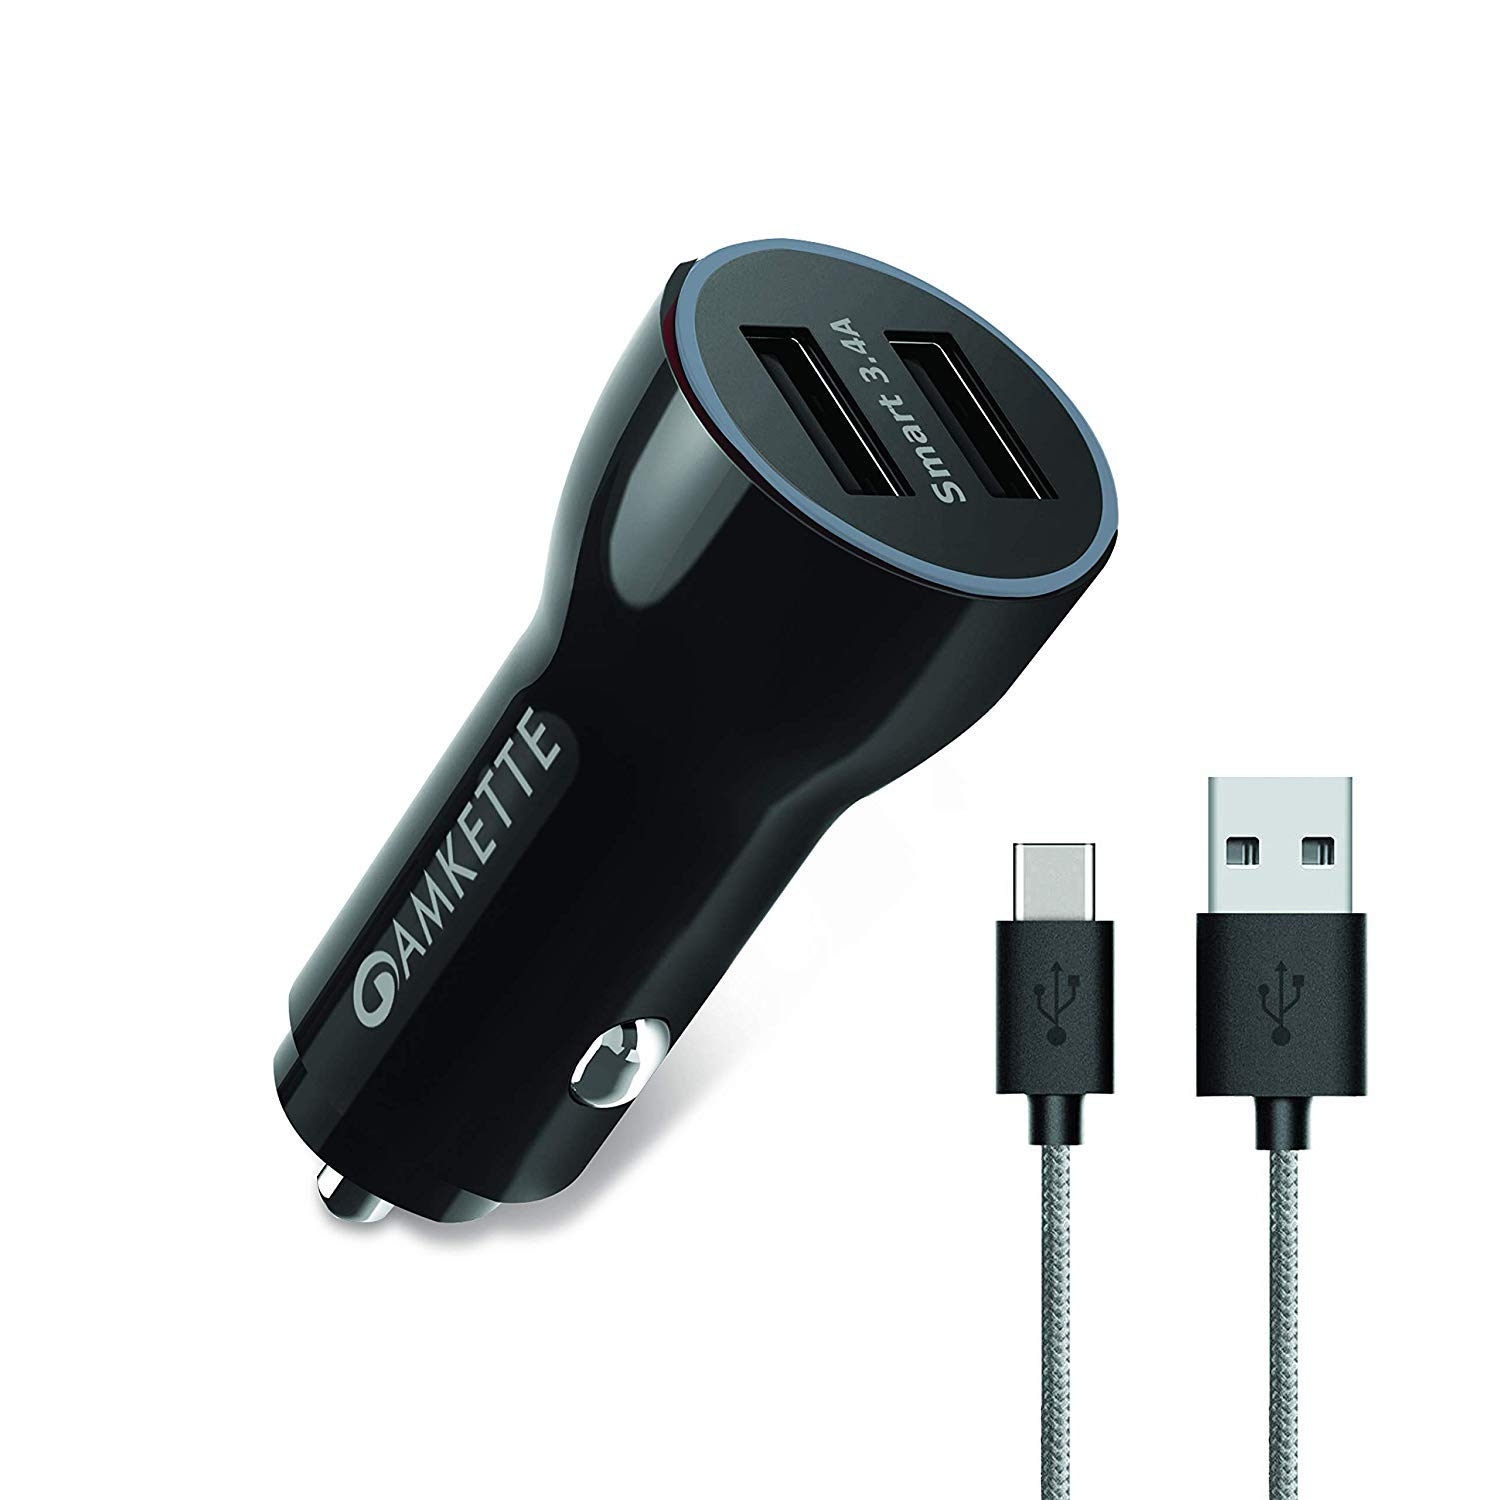 Amkette Power Pro Dual Port USB Car Charger Smart Charging with 3.4A + Braided Micro USB Cable (Black)